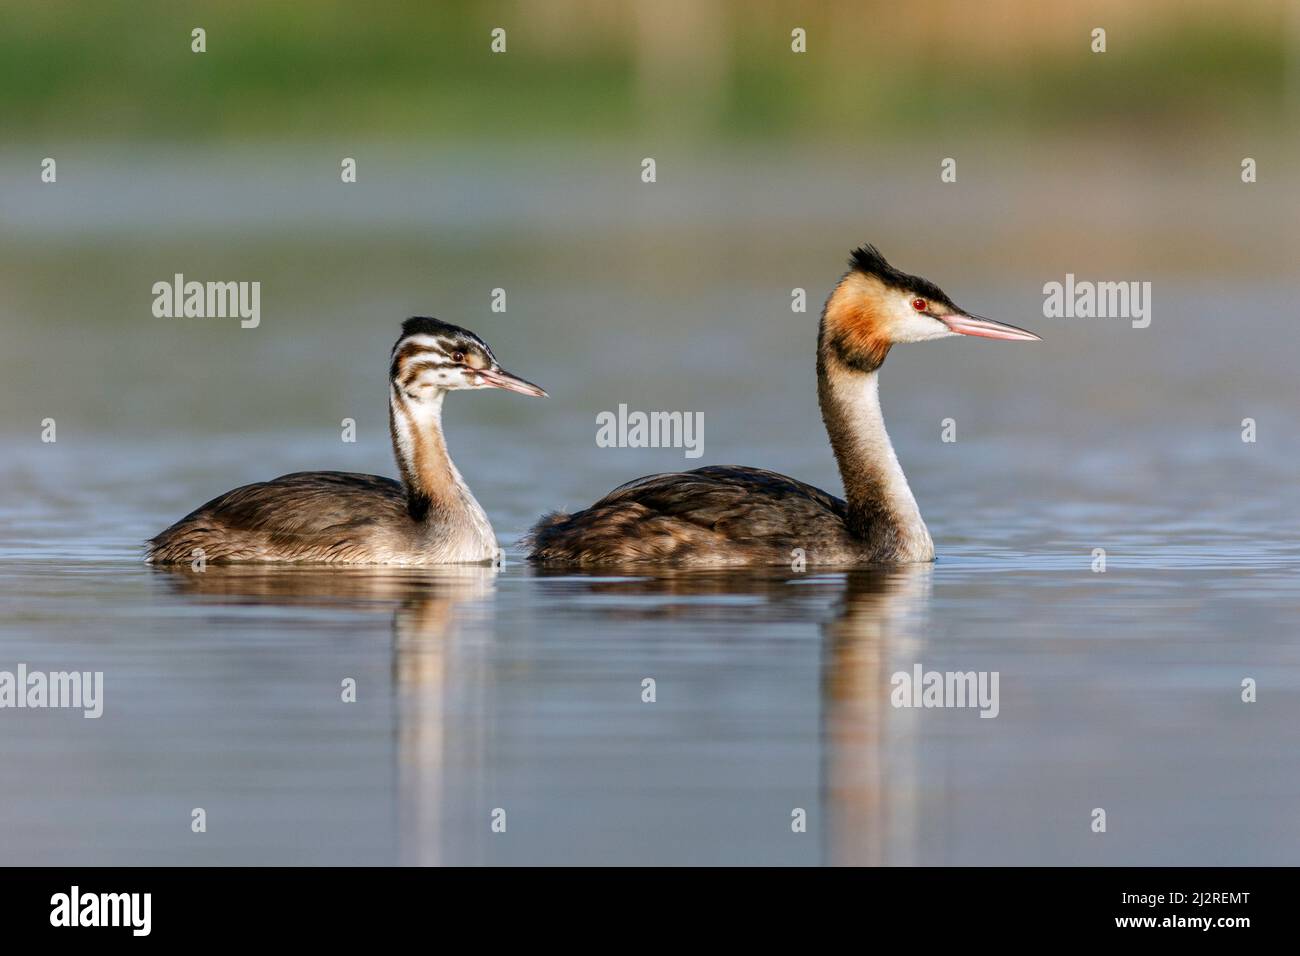 Great crested grebes, Podiceps cristatus, adult female and chick, Comunidad valenciana wetlands, Spain Stock Photo